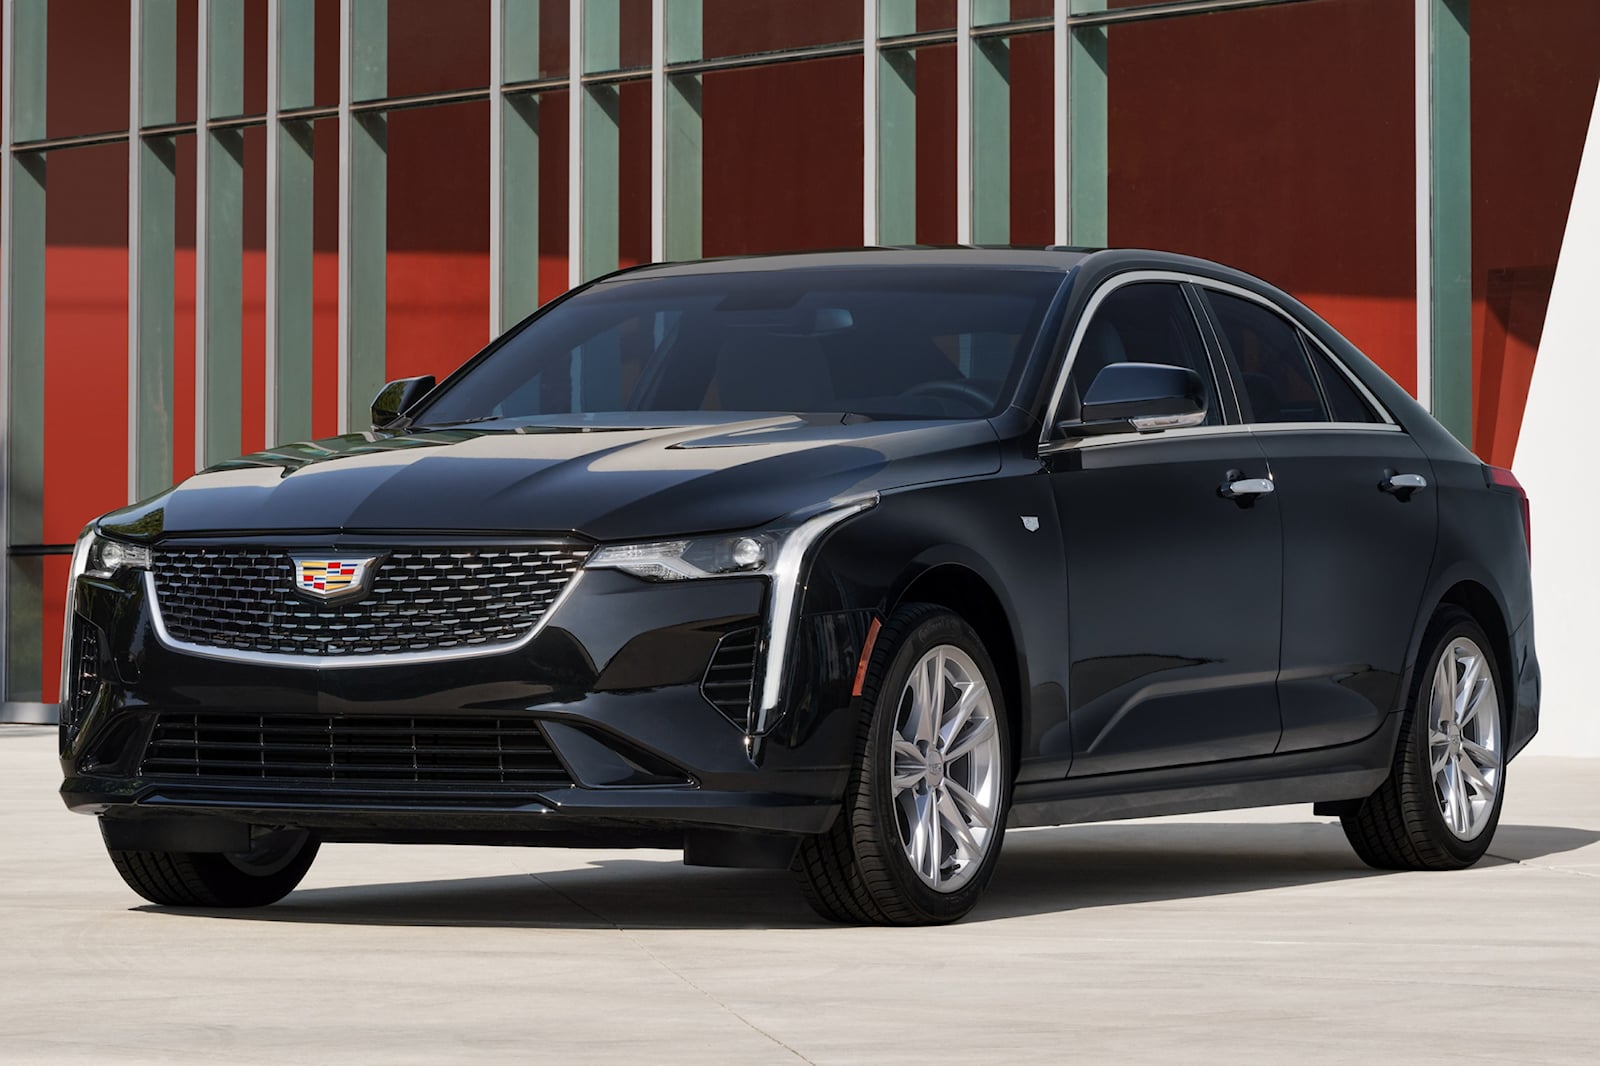 Pick Up A Sweet Deal On The Cadillac CT4 This Weekend